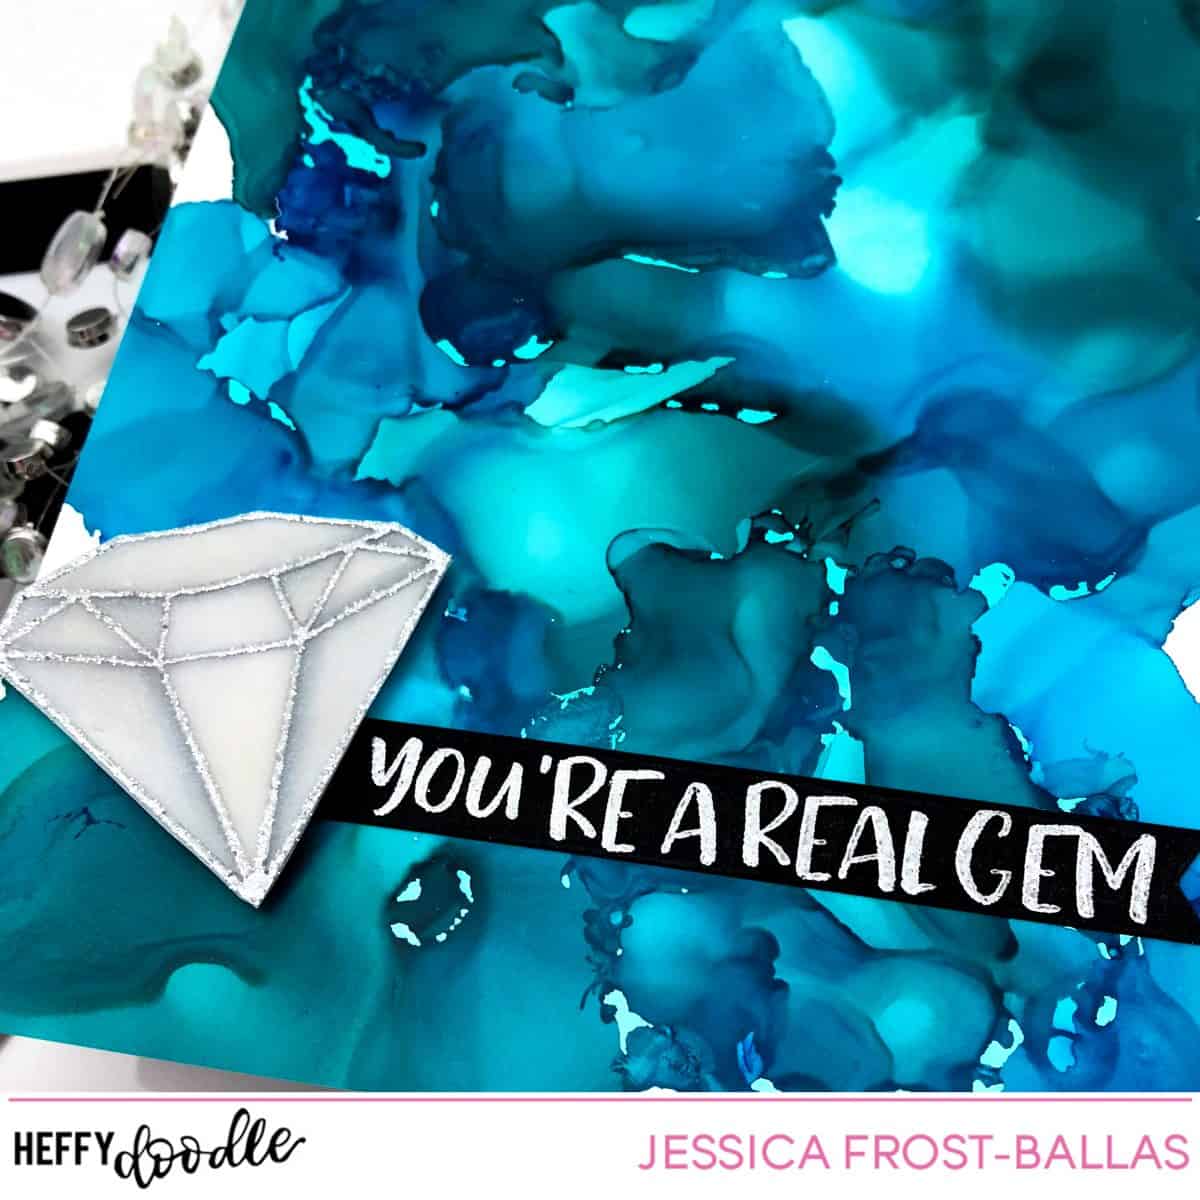 You're a Real Gem by Jessica Frost-Ballas for Heffy Doodle